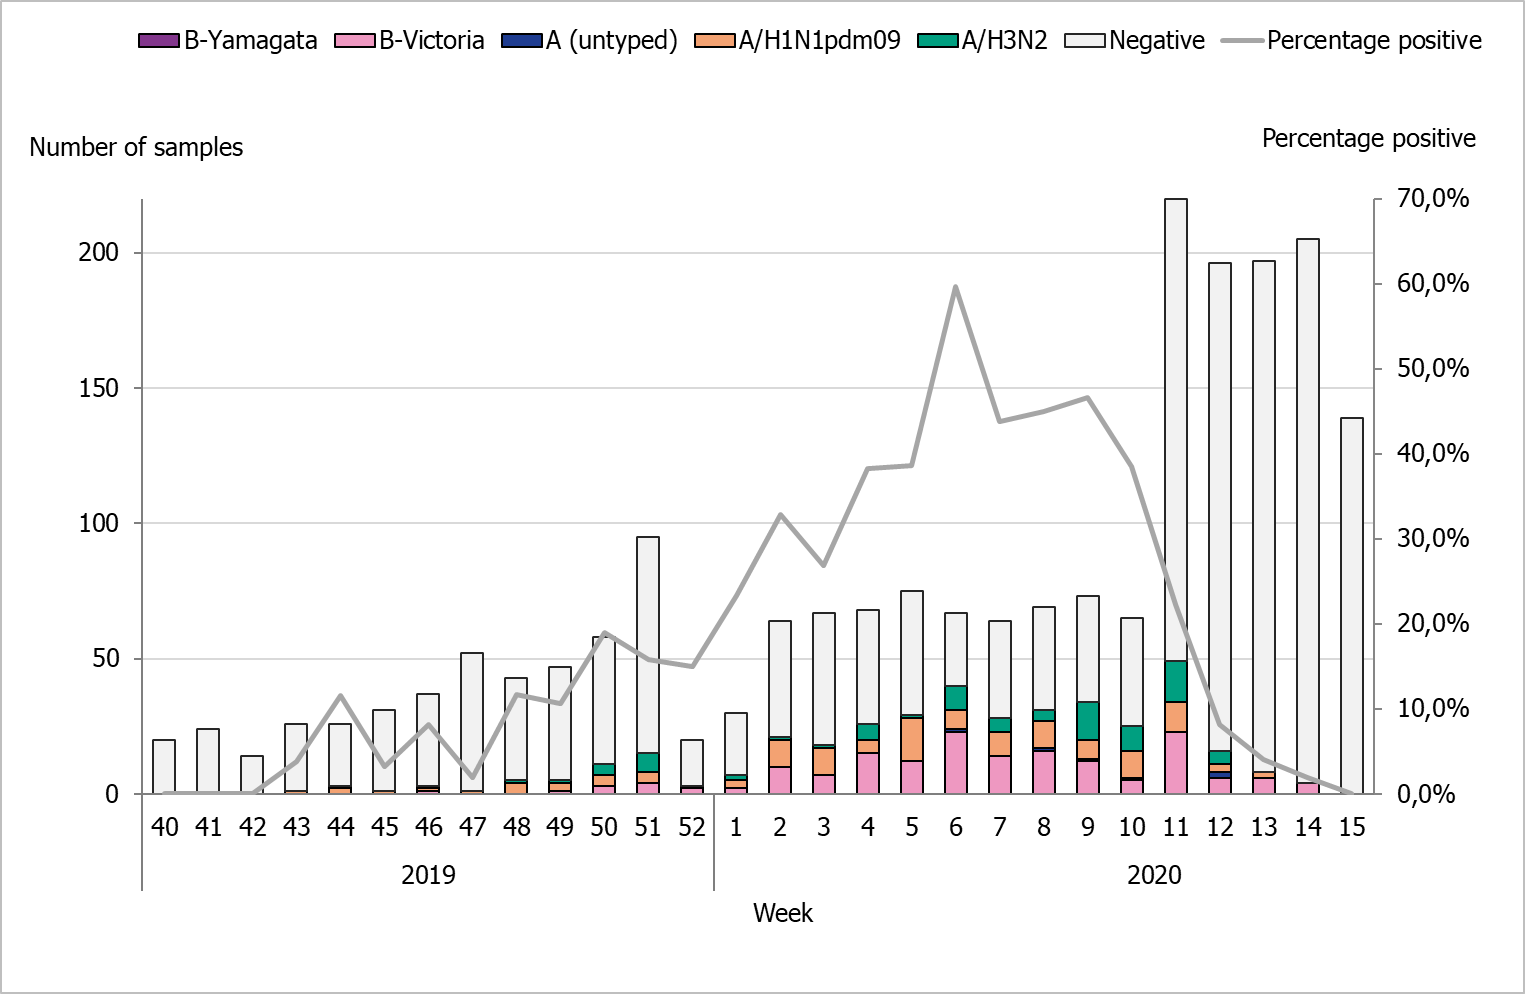 Bar graph showing the number of sentinel samples submitted each week, number of samples by subtype/lineage, and the percentage positive as a line. 